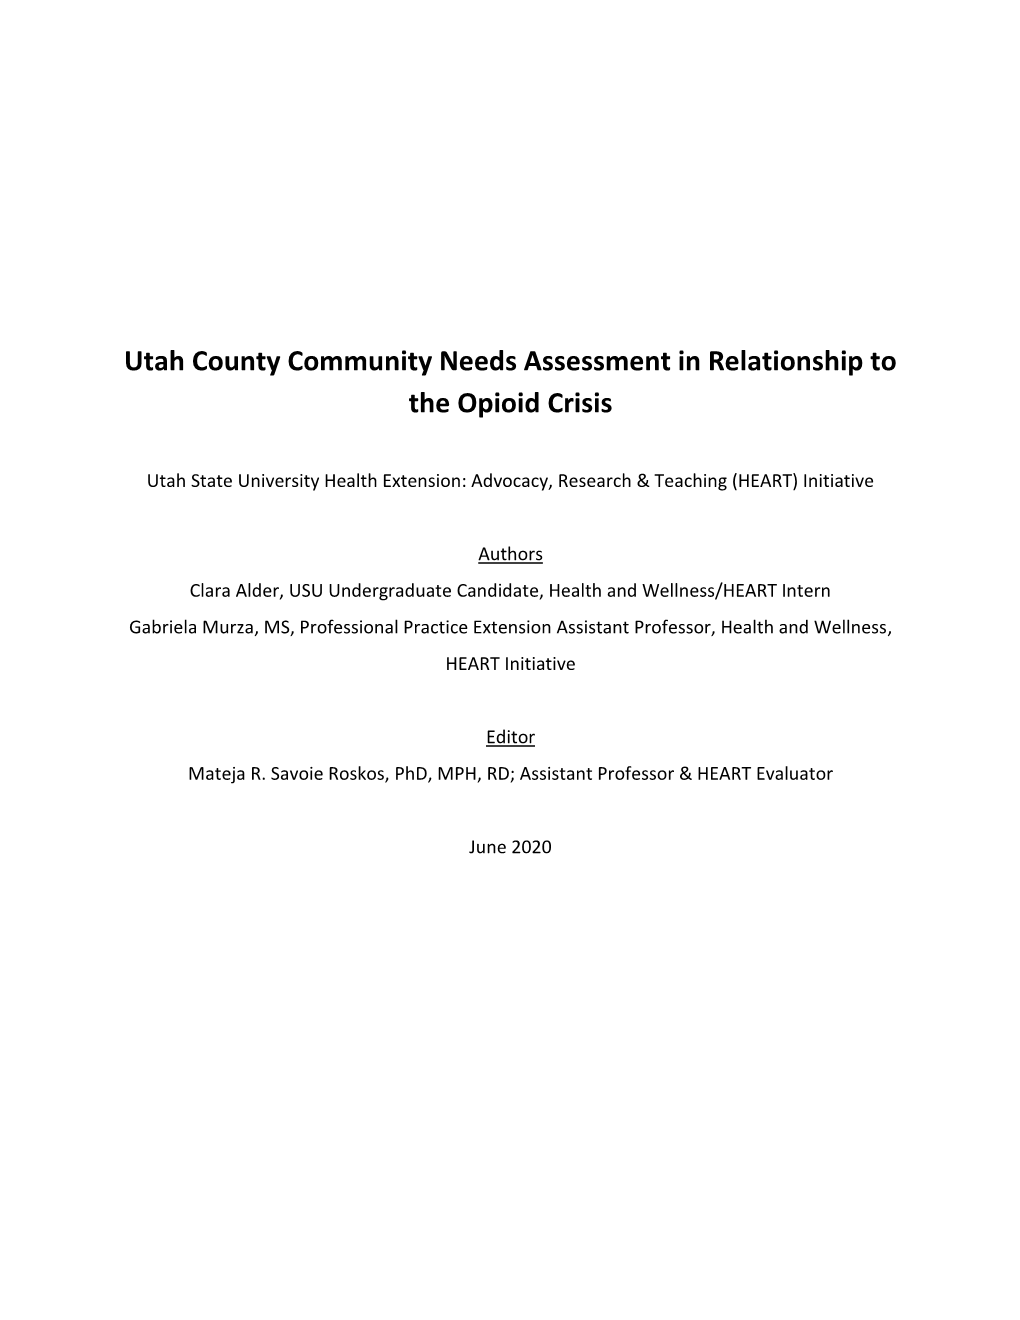 Utah County Community Needs Assessment in Relationship to the Opioid Crisis